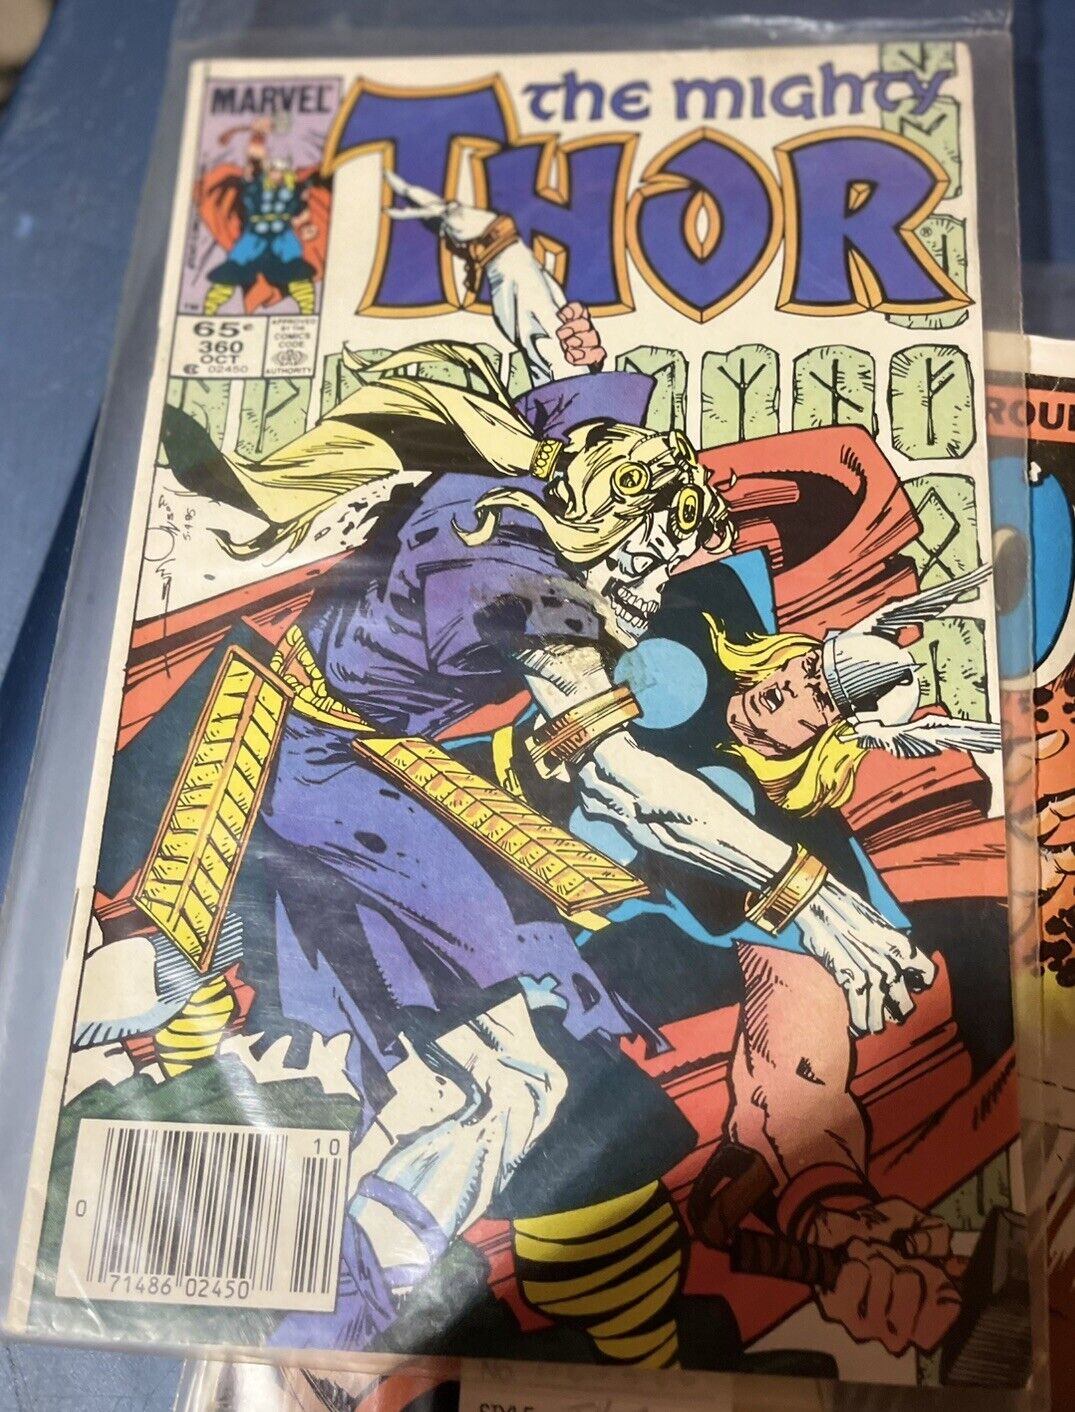 Marvel Comics The Mighty Thor #360 from October 1985